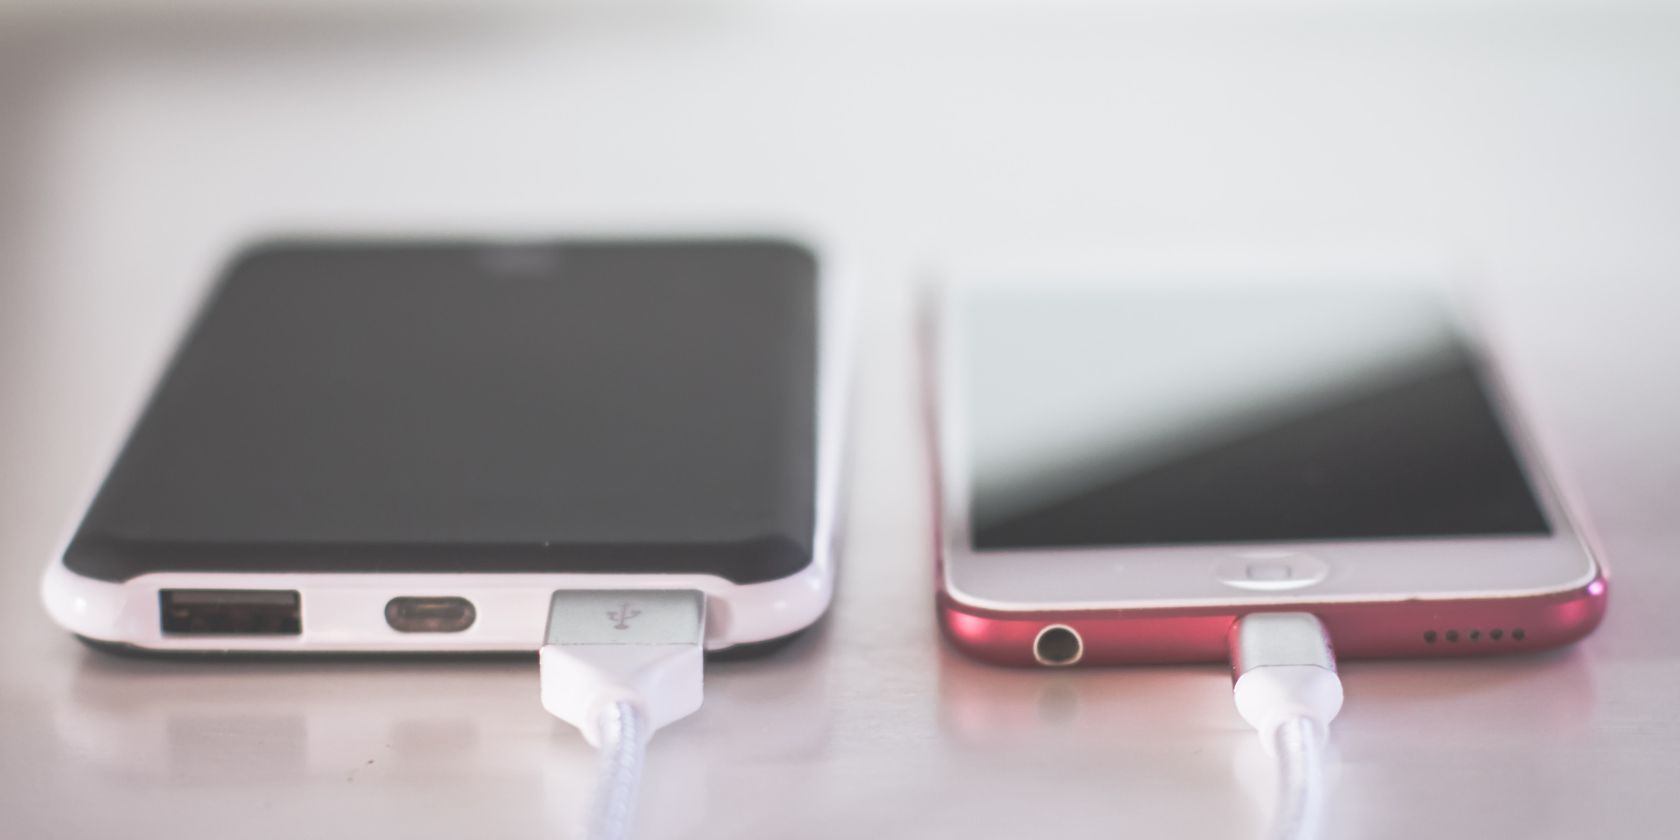 two phones charging on desk